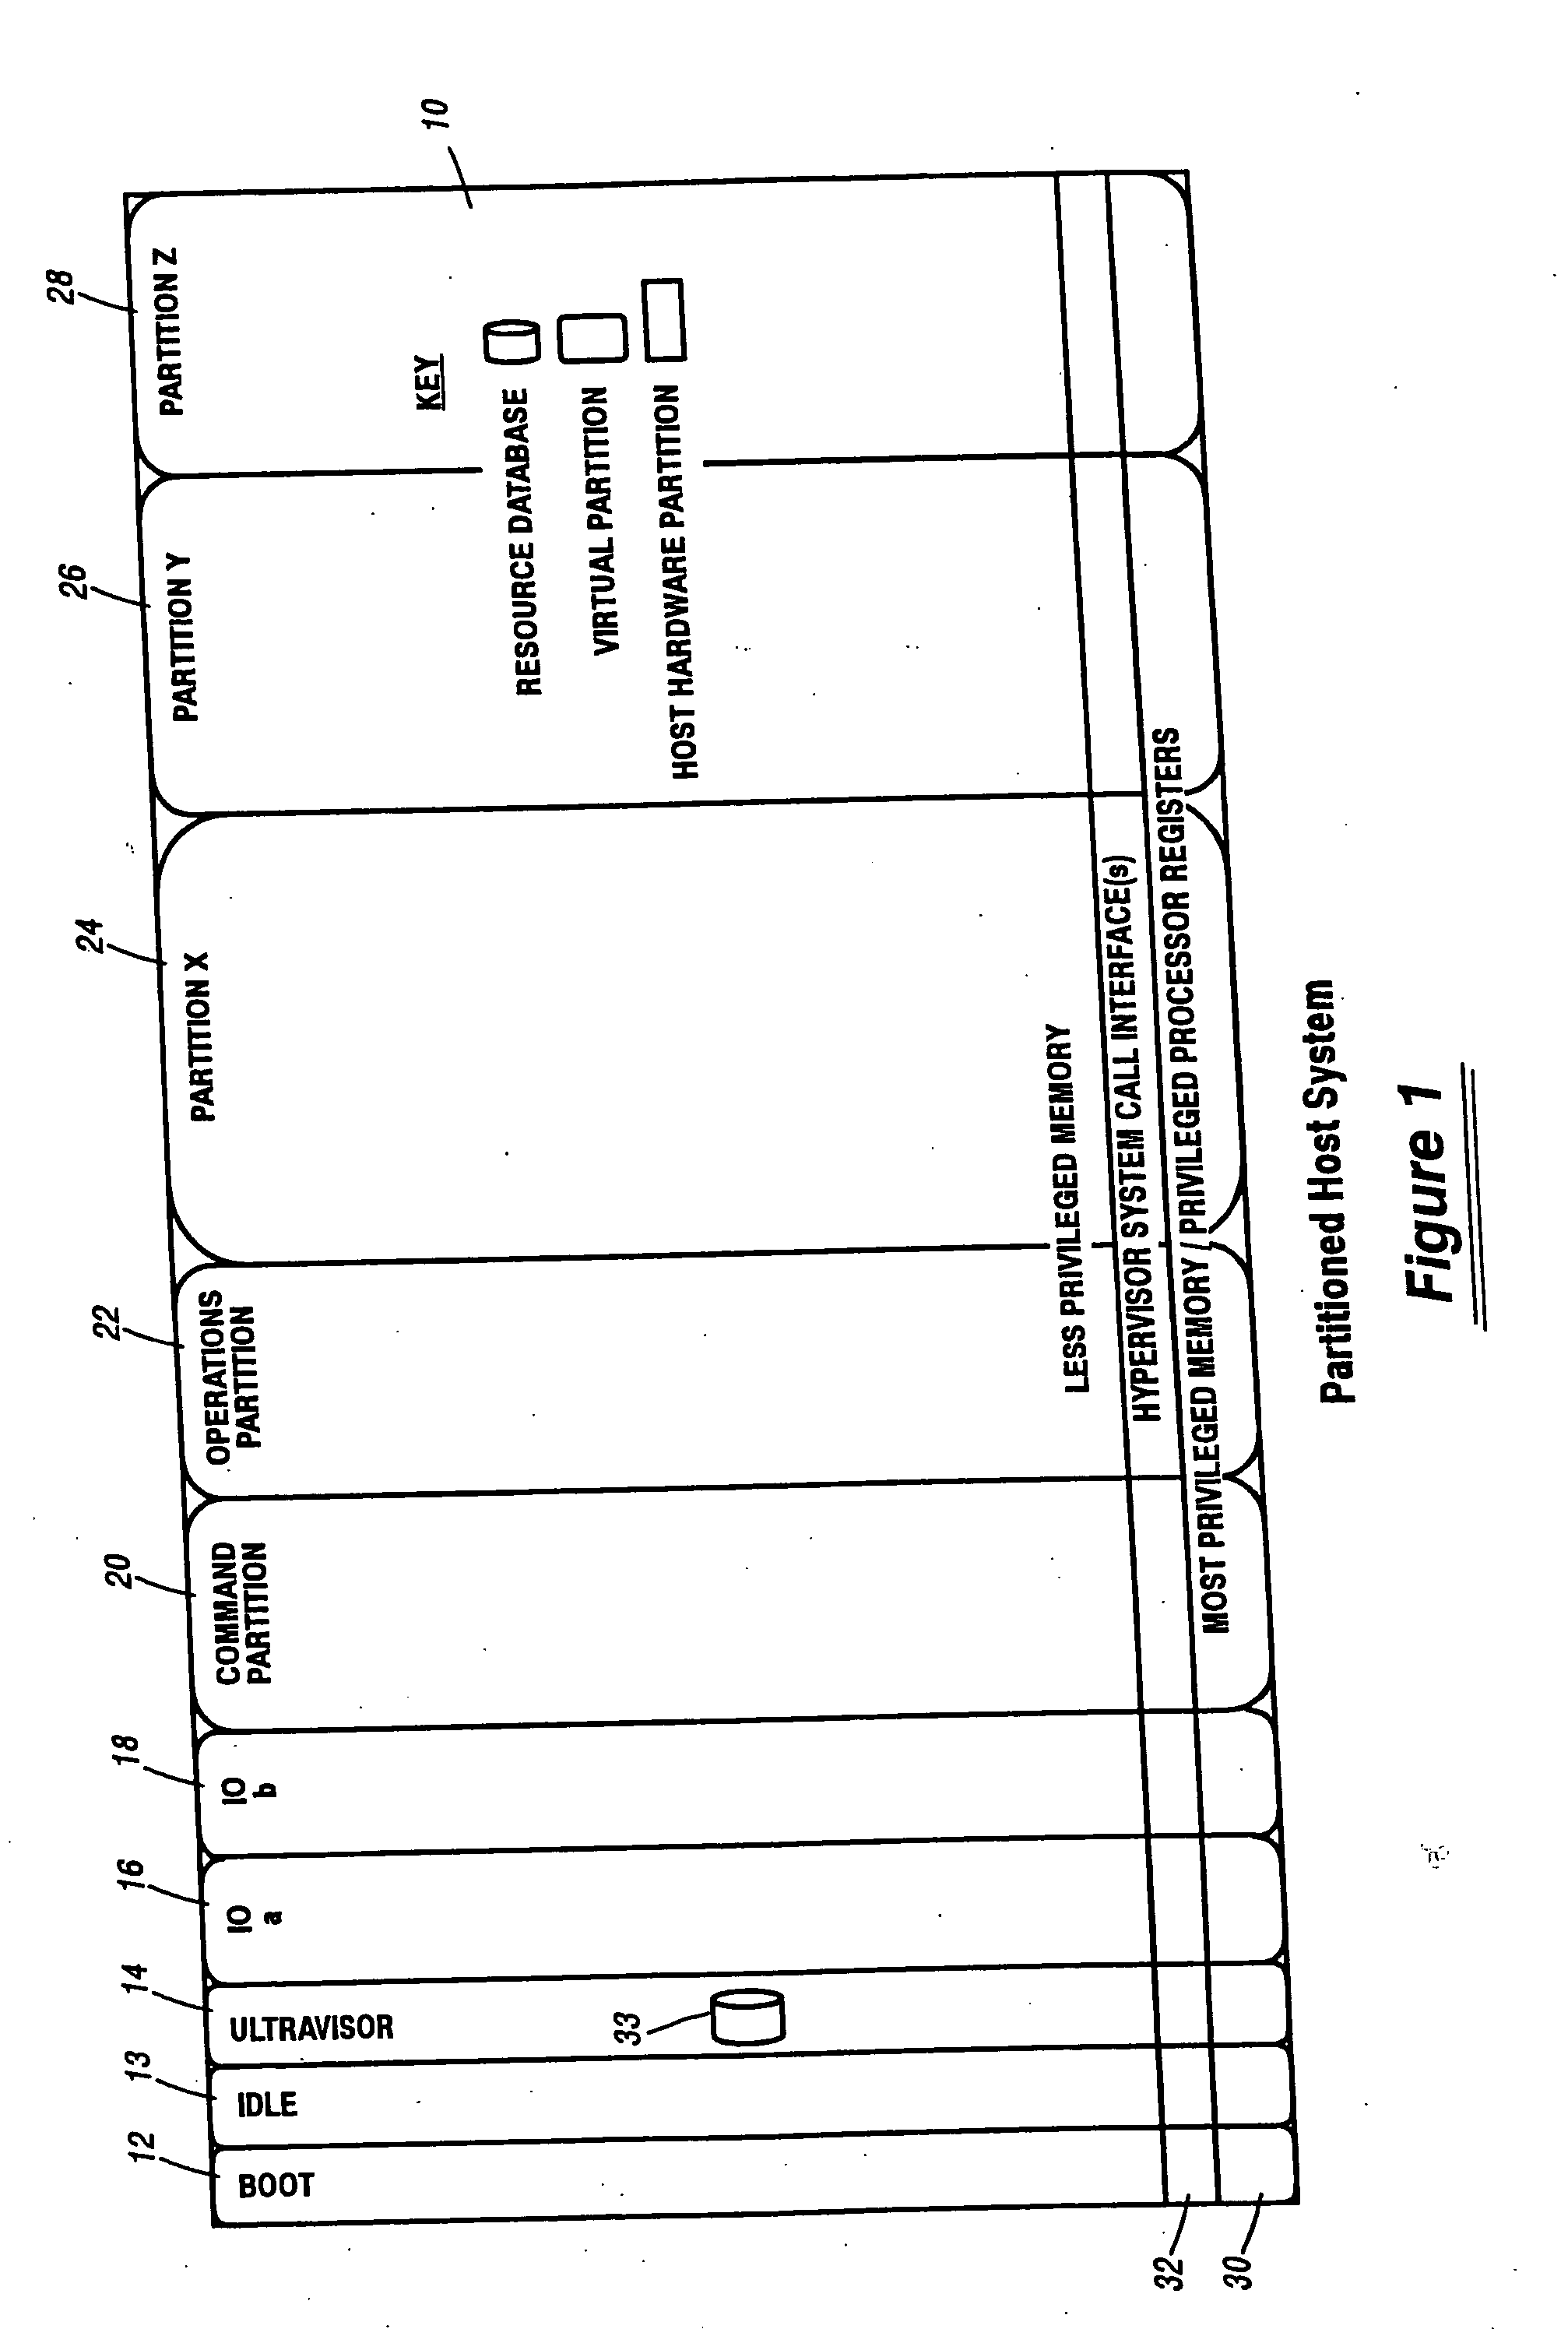 Scalable partition memory mapping system